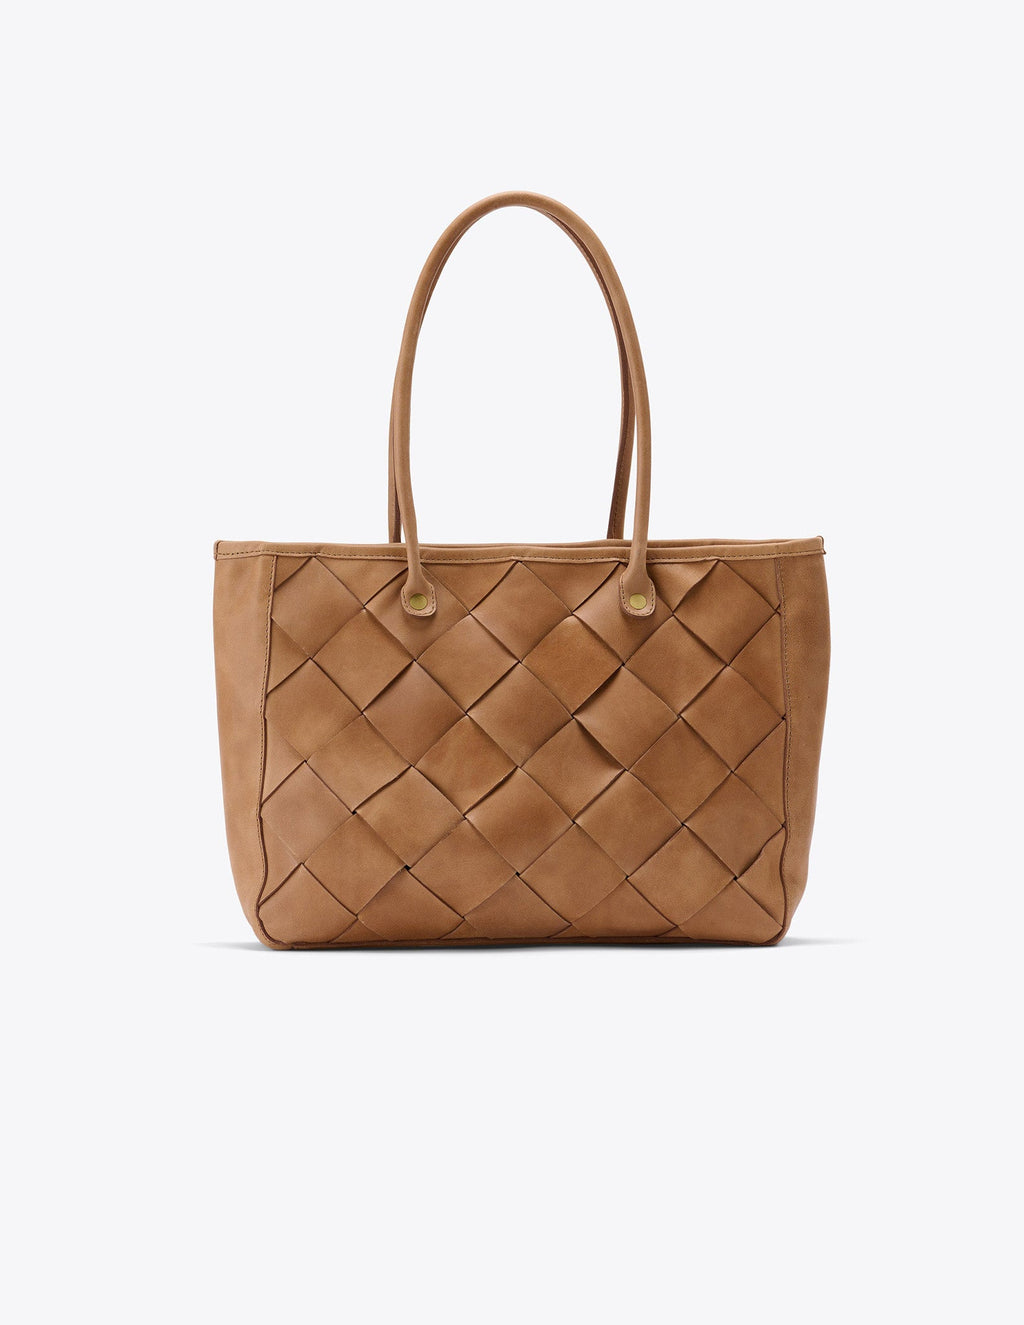 Carry-All Handwoven Tote - Almond